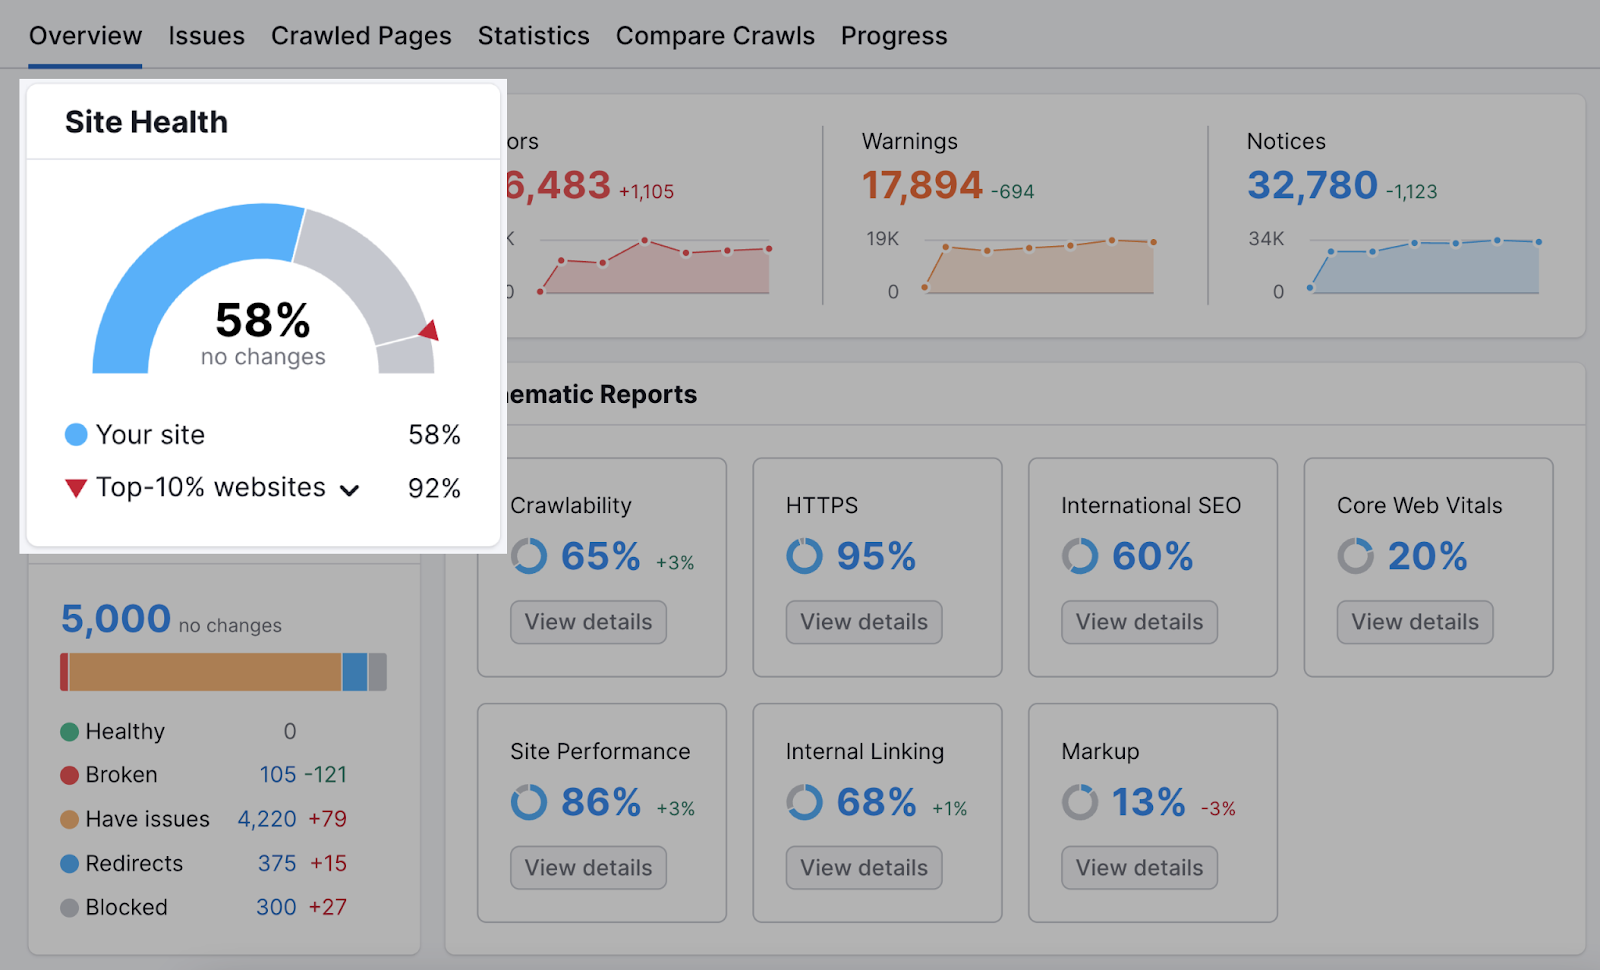 Site Health metric highlighted